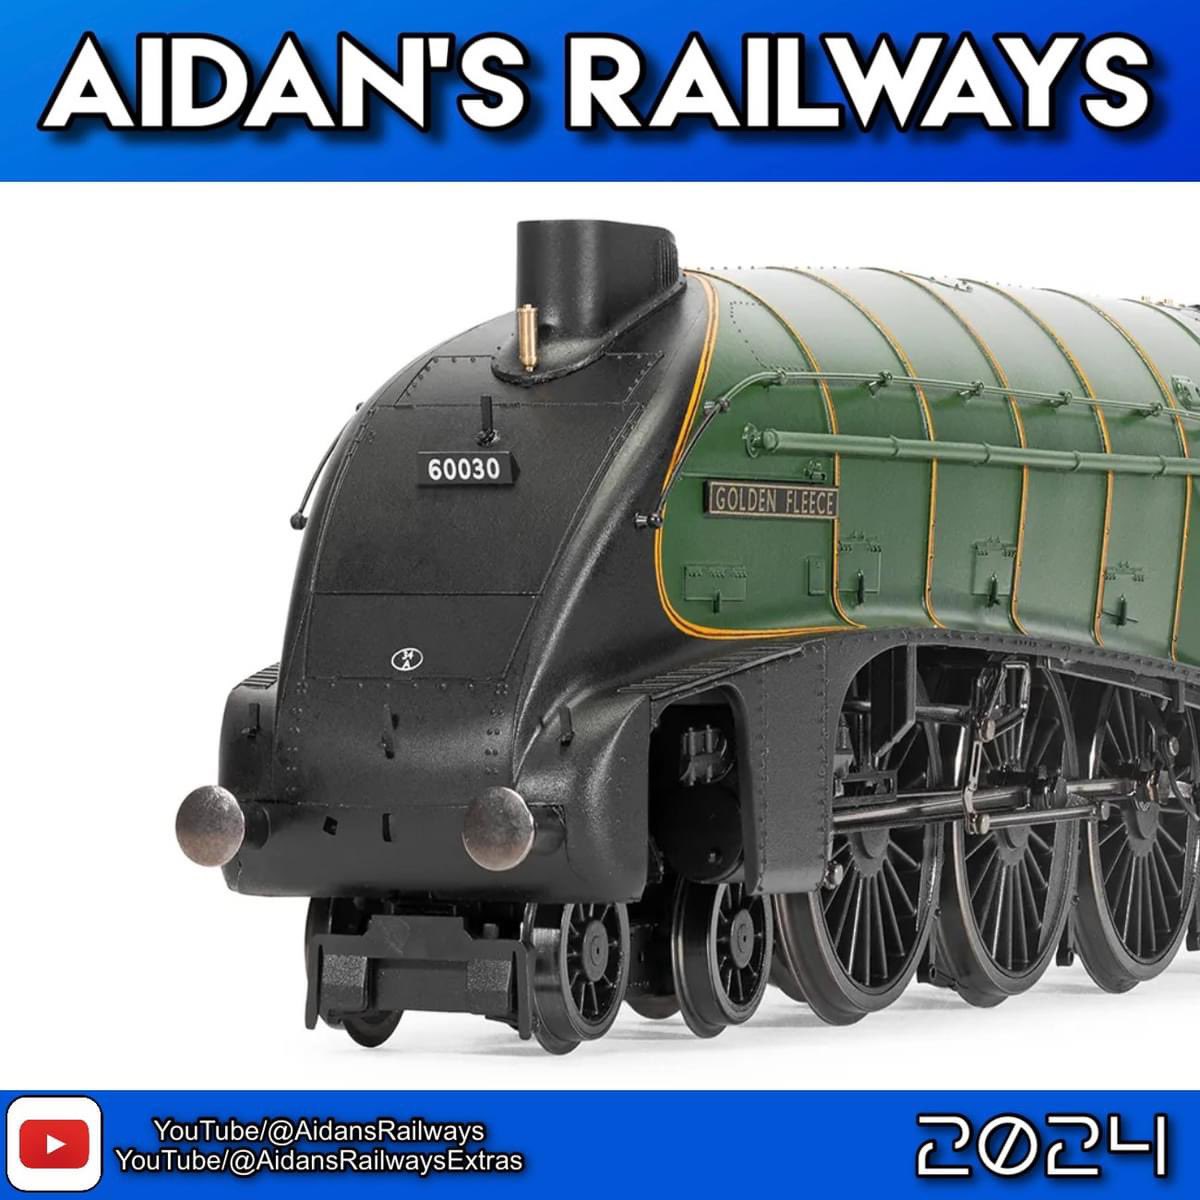 BR, A4 Class, 4-6-2, 60030 'Golden Fleece' - Era 5 Purchase yours here 👉: prf.hn/l/q3BAOlo LNER 4495 'Great Snipe', soon after renamed 'Golden Fleece' was delivered from Doncaster Works in 1937. #modelrailway #modeltrains #trains #railway #hornbytrains #modelrailways